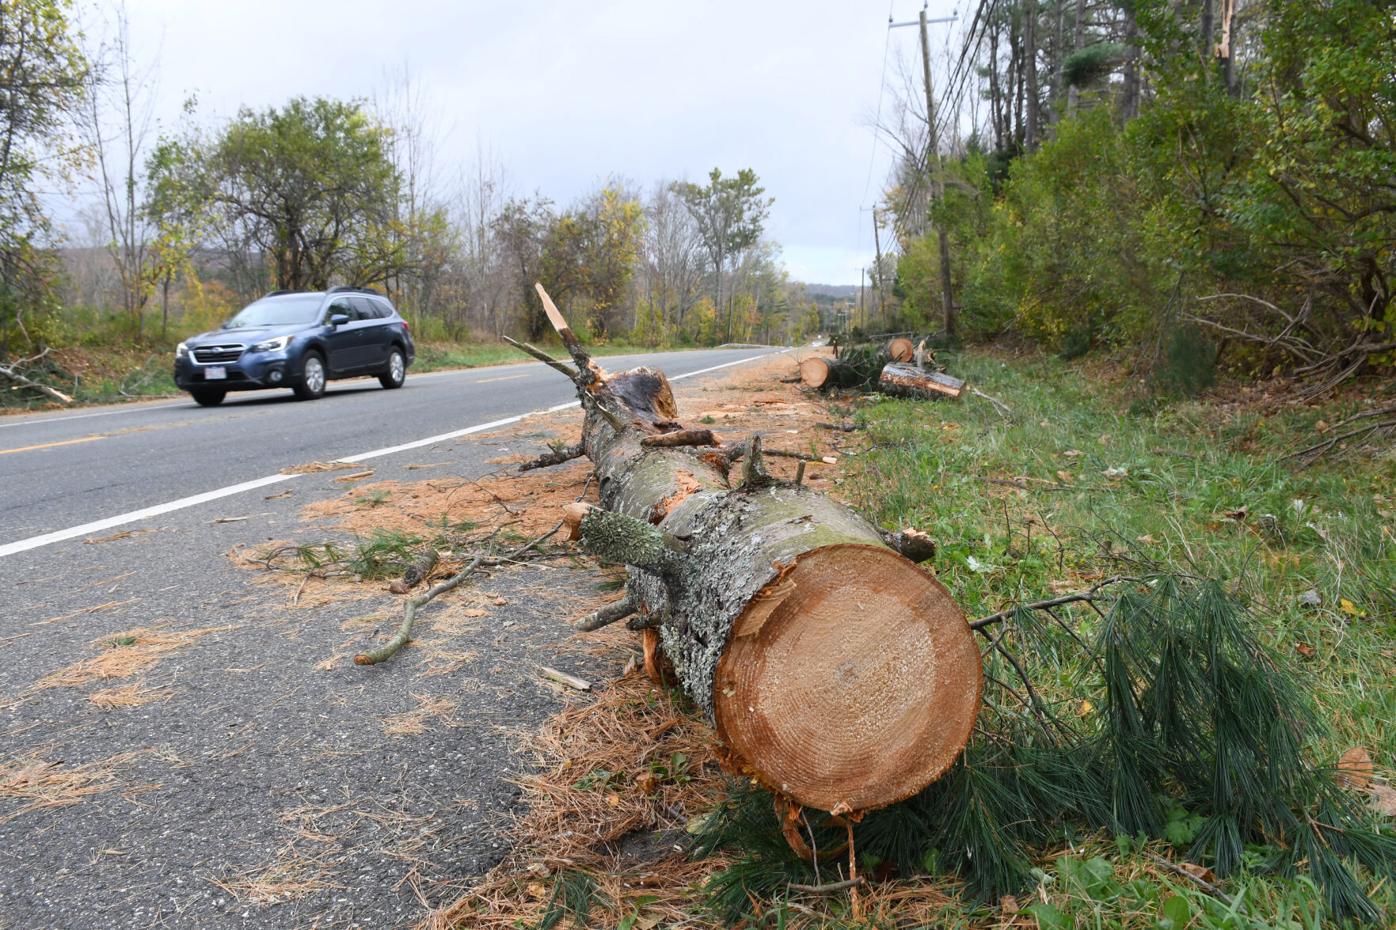 Tree debris covers the shoulder of the road